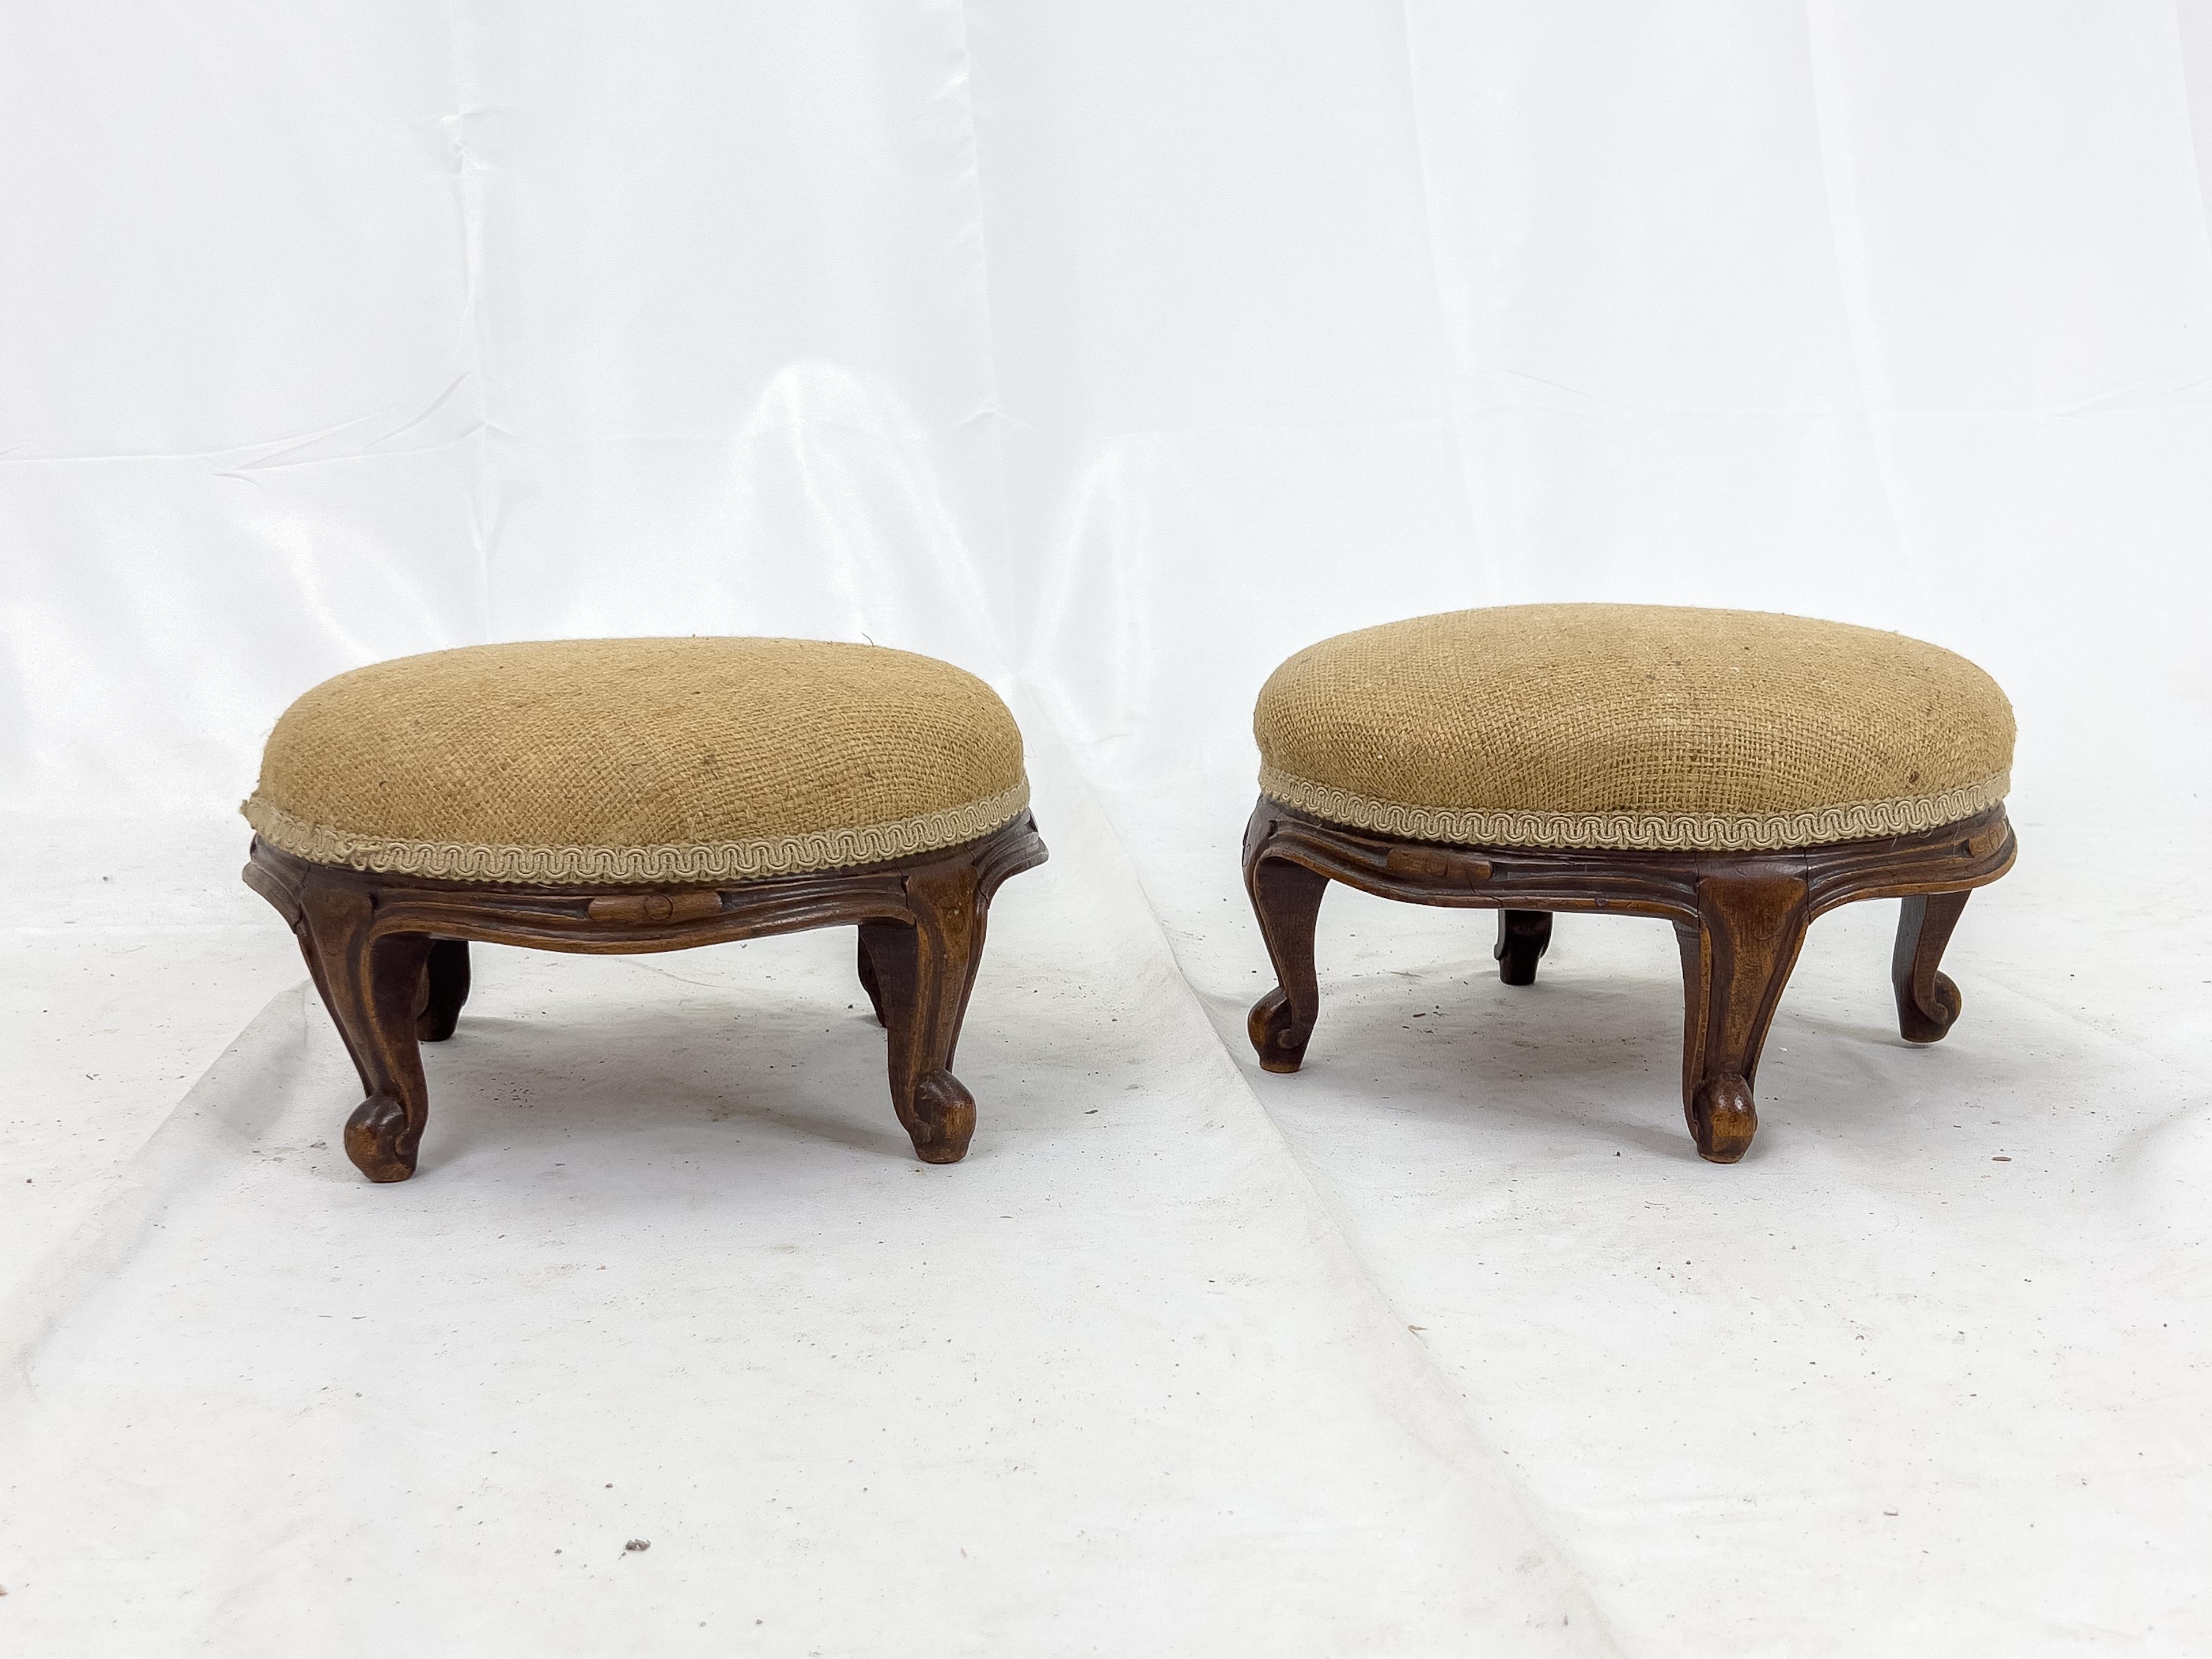 Carved Pair of Small 19th Century Louis XV Style French Walnut and Burlap Foot Stools For Sale